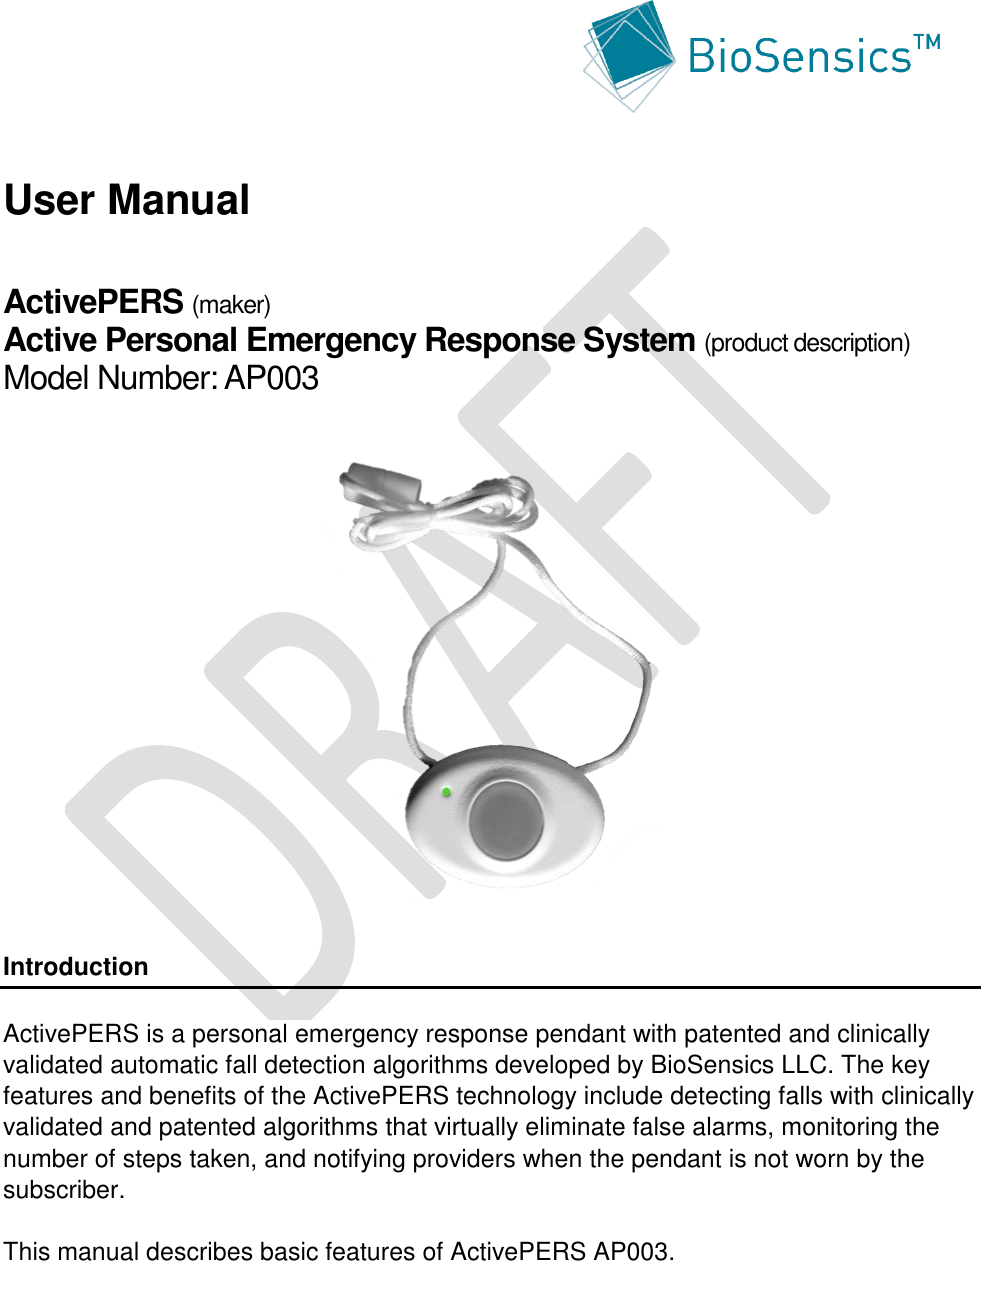        User Manual  ActivePERS (maker) Active Personal Emergency Response System (product description) Model Number: AP003                 Introduction  ActivePERS is a personal emergency response pendant with patented and clinically validated automatic fall detection algorithms developed by BioSensics LLC. The key features and benefits of the ActivePERS technology include detecting falls with clinically validated and patented algorithms that virtually eliminate false alarms, monitoring the number of steps taken, and notifying providers when the pendant is not worn by the subscriber.  This manual describes basic features of ActivePERS AP003.  